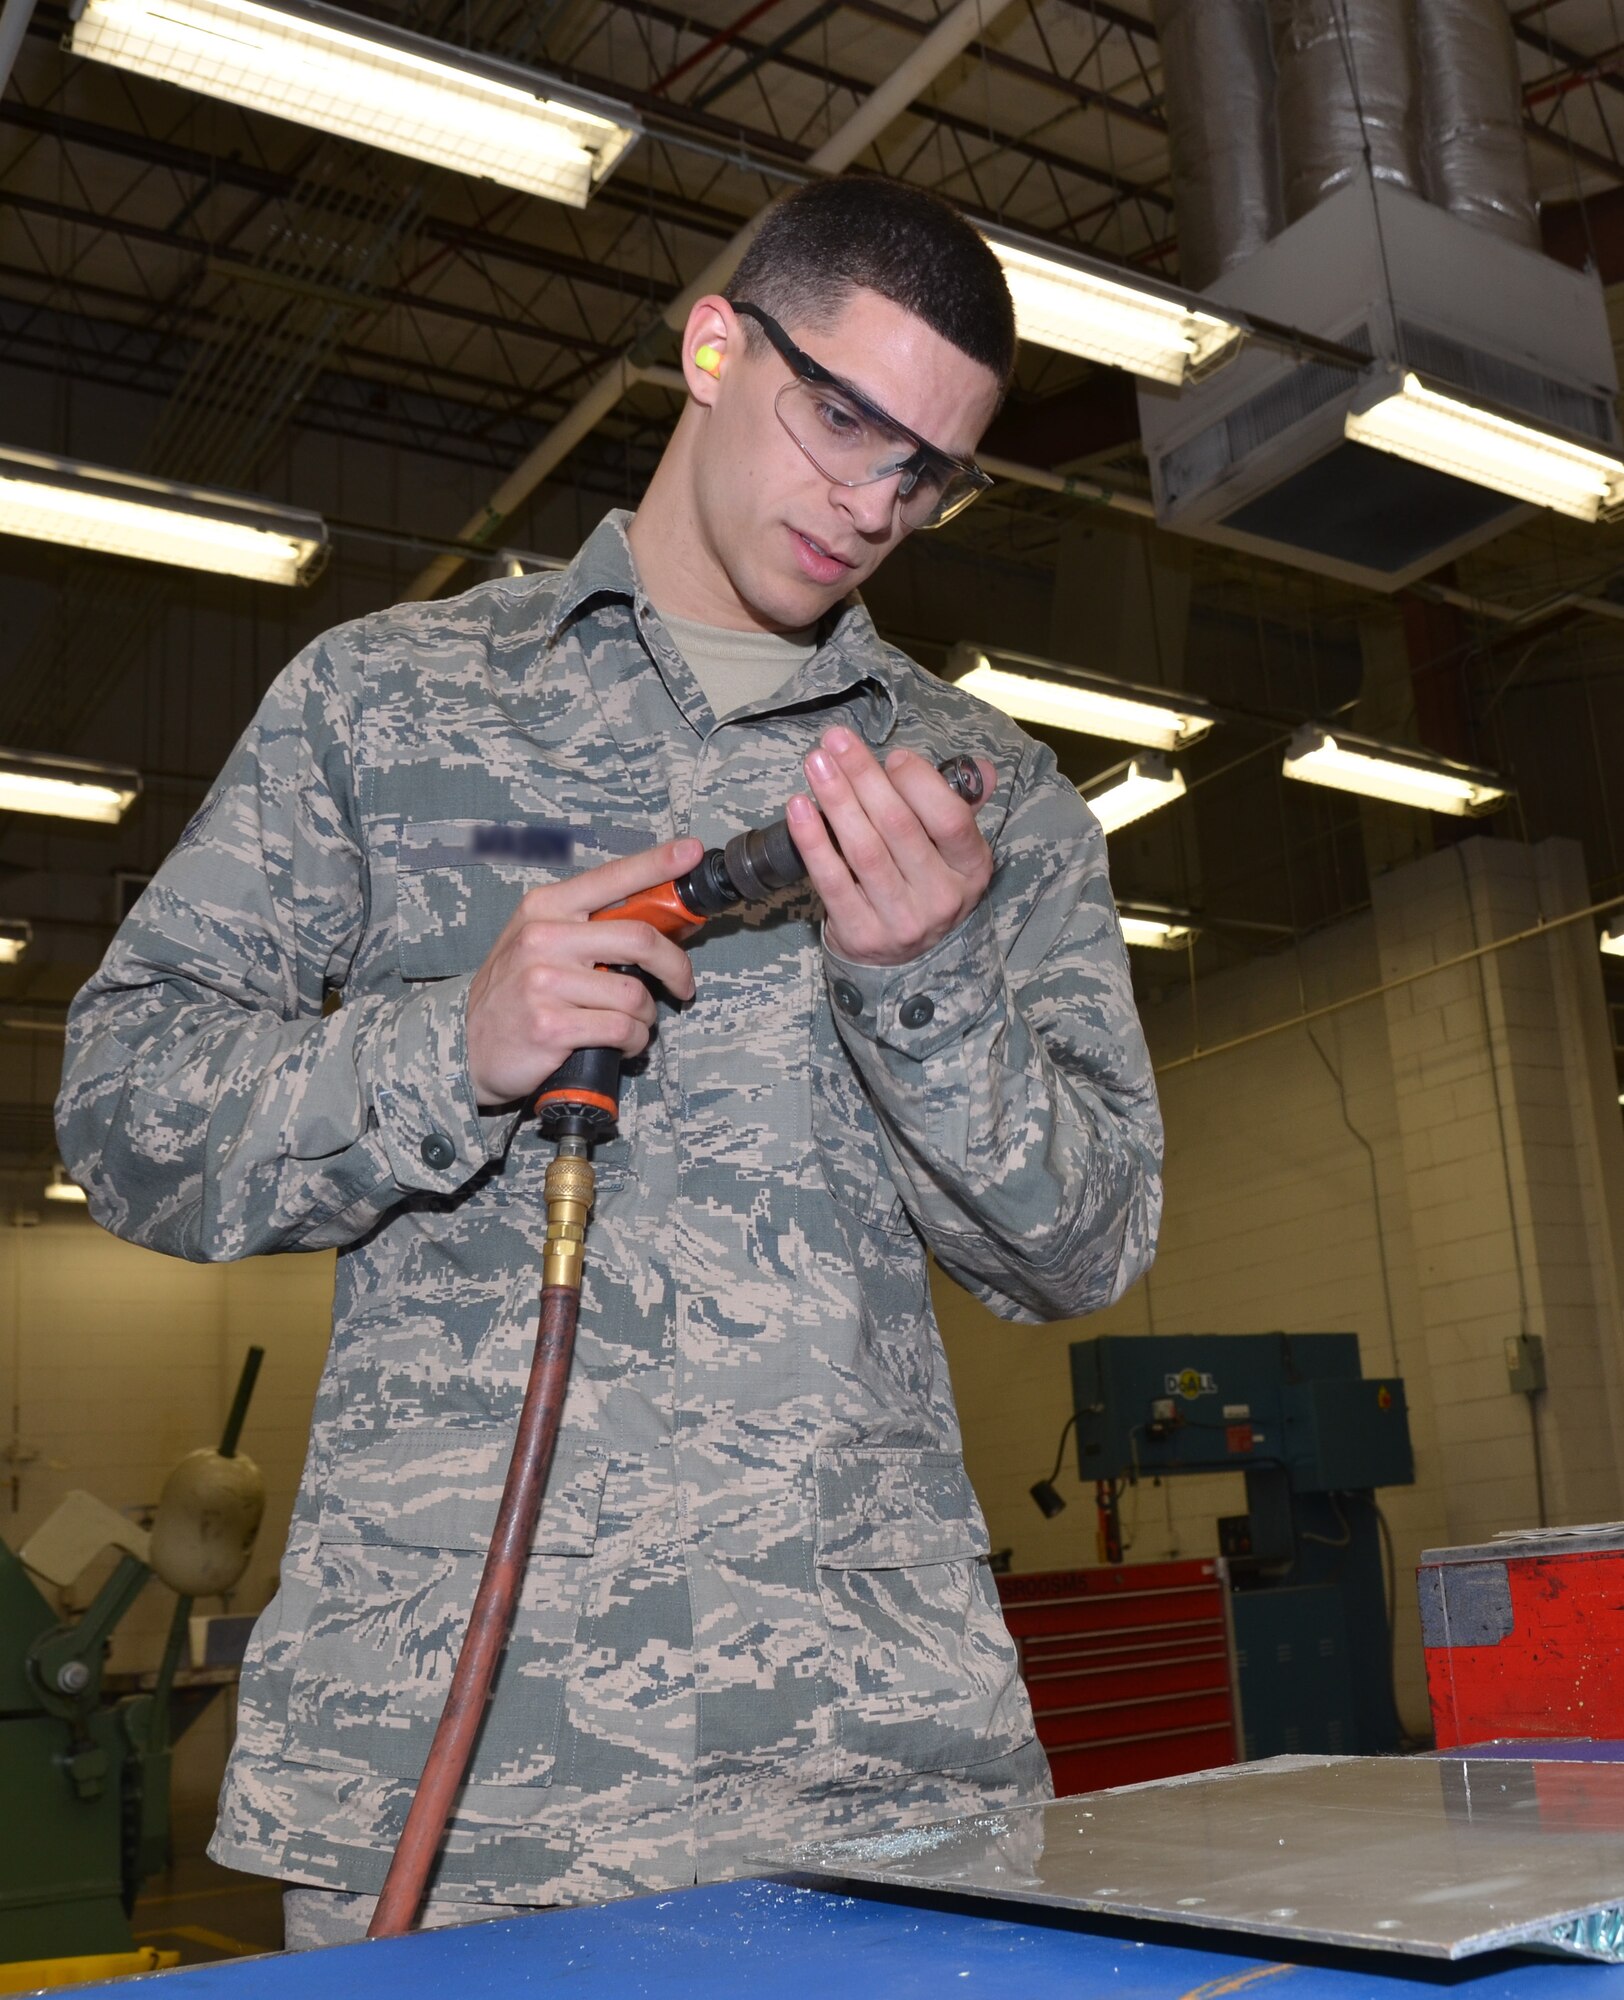 A U.S. Air Force 116th Air Control Wing aircraft structural mechanic, Georgia Air National Guard, adjusts a drill bit he's using to drill countersinks into an aircraft panel, April 20, 2015. The senior airman was recently named 2014 Outstanding Airman of the Year for both the wing and the Georgia Air National Guard. (U.S. Air National Guard photo by Tech. Sgt. Julie Parker/Released)(Names have been blurred/withheld for security purposes)